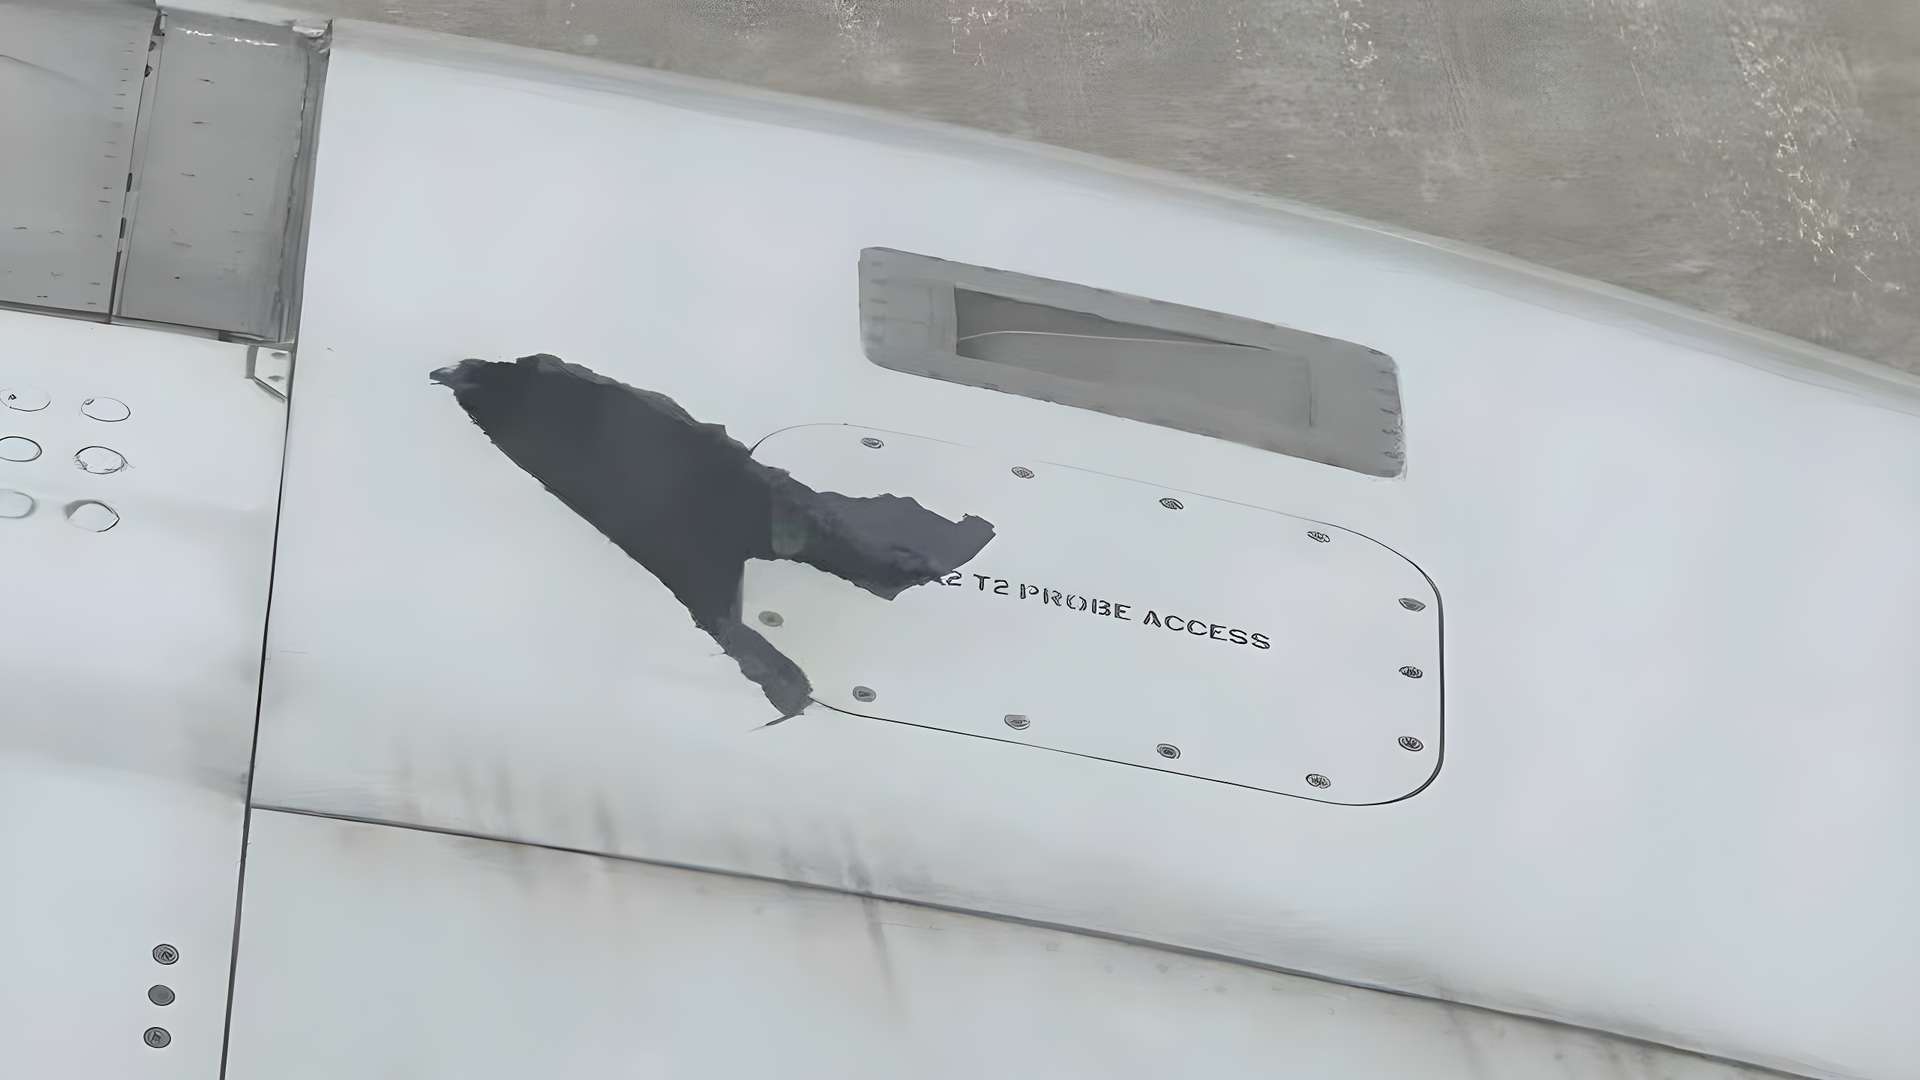 INCIDENT: A330 Engine Fan Blade Fracture, Vibrations In Flight